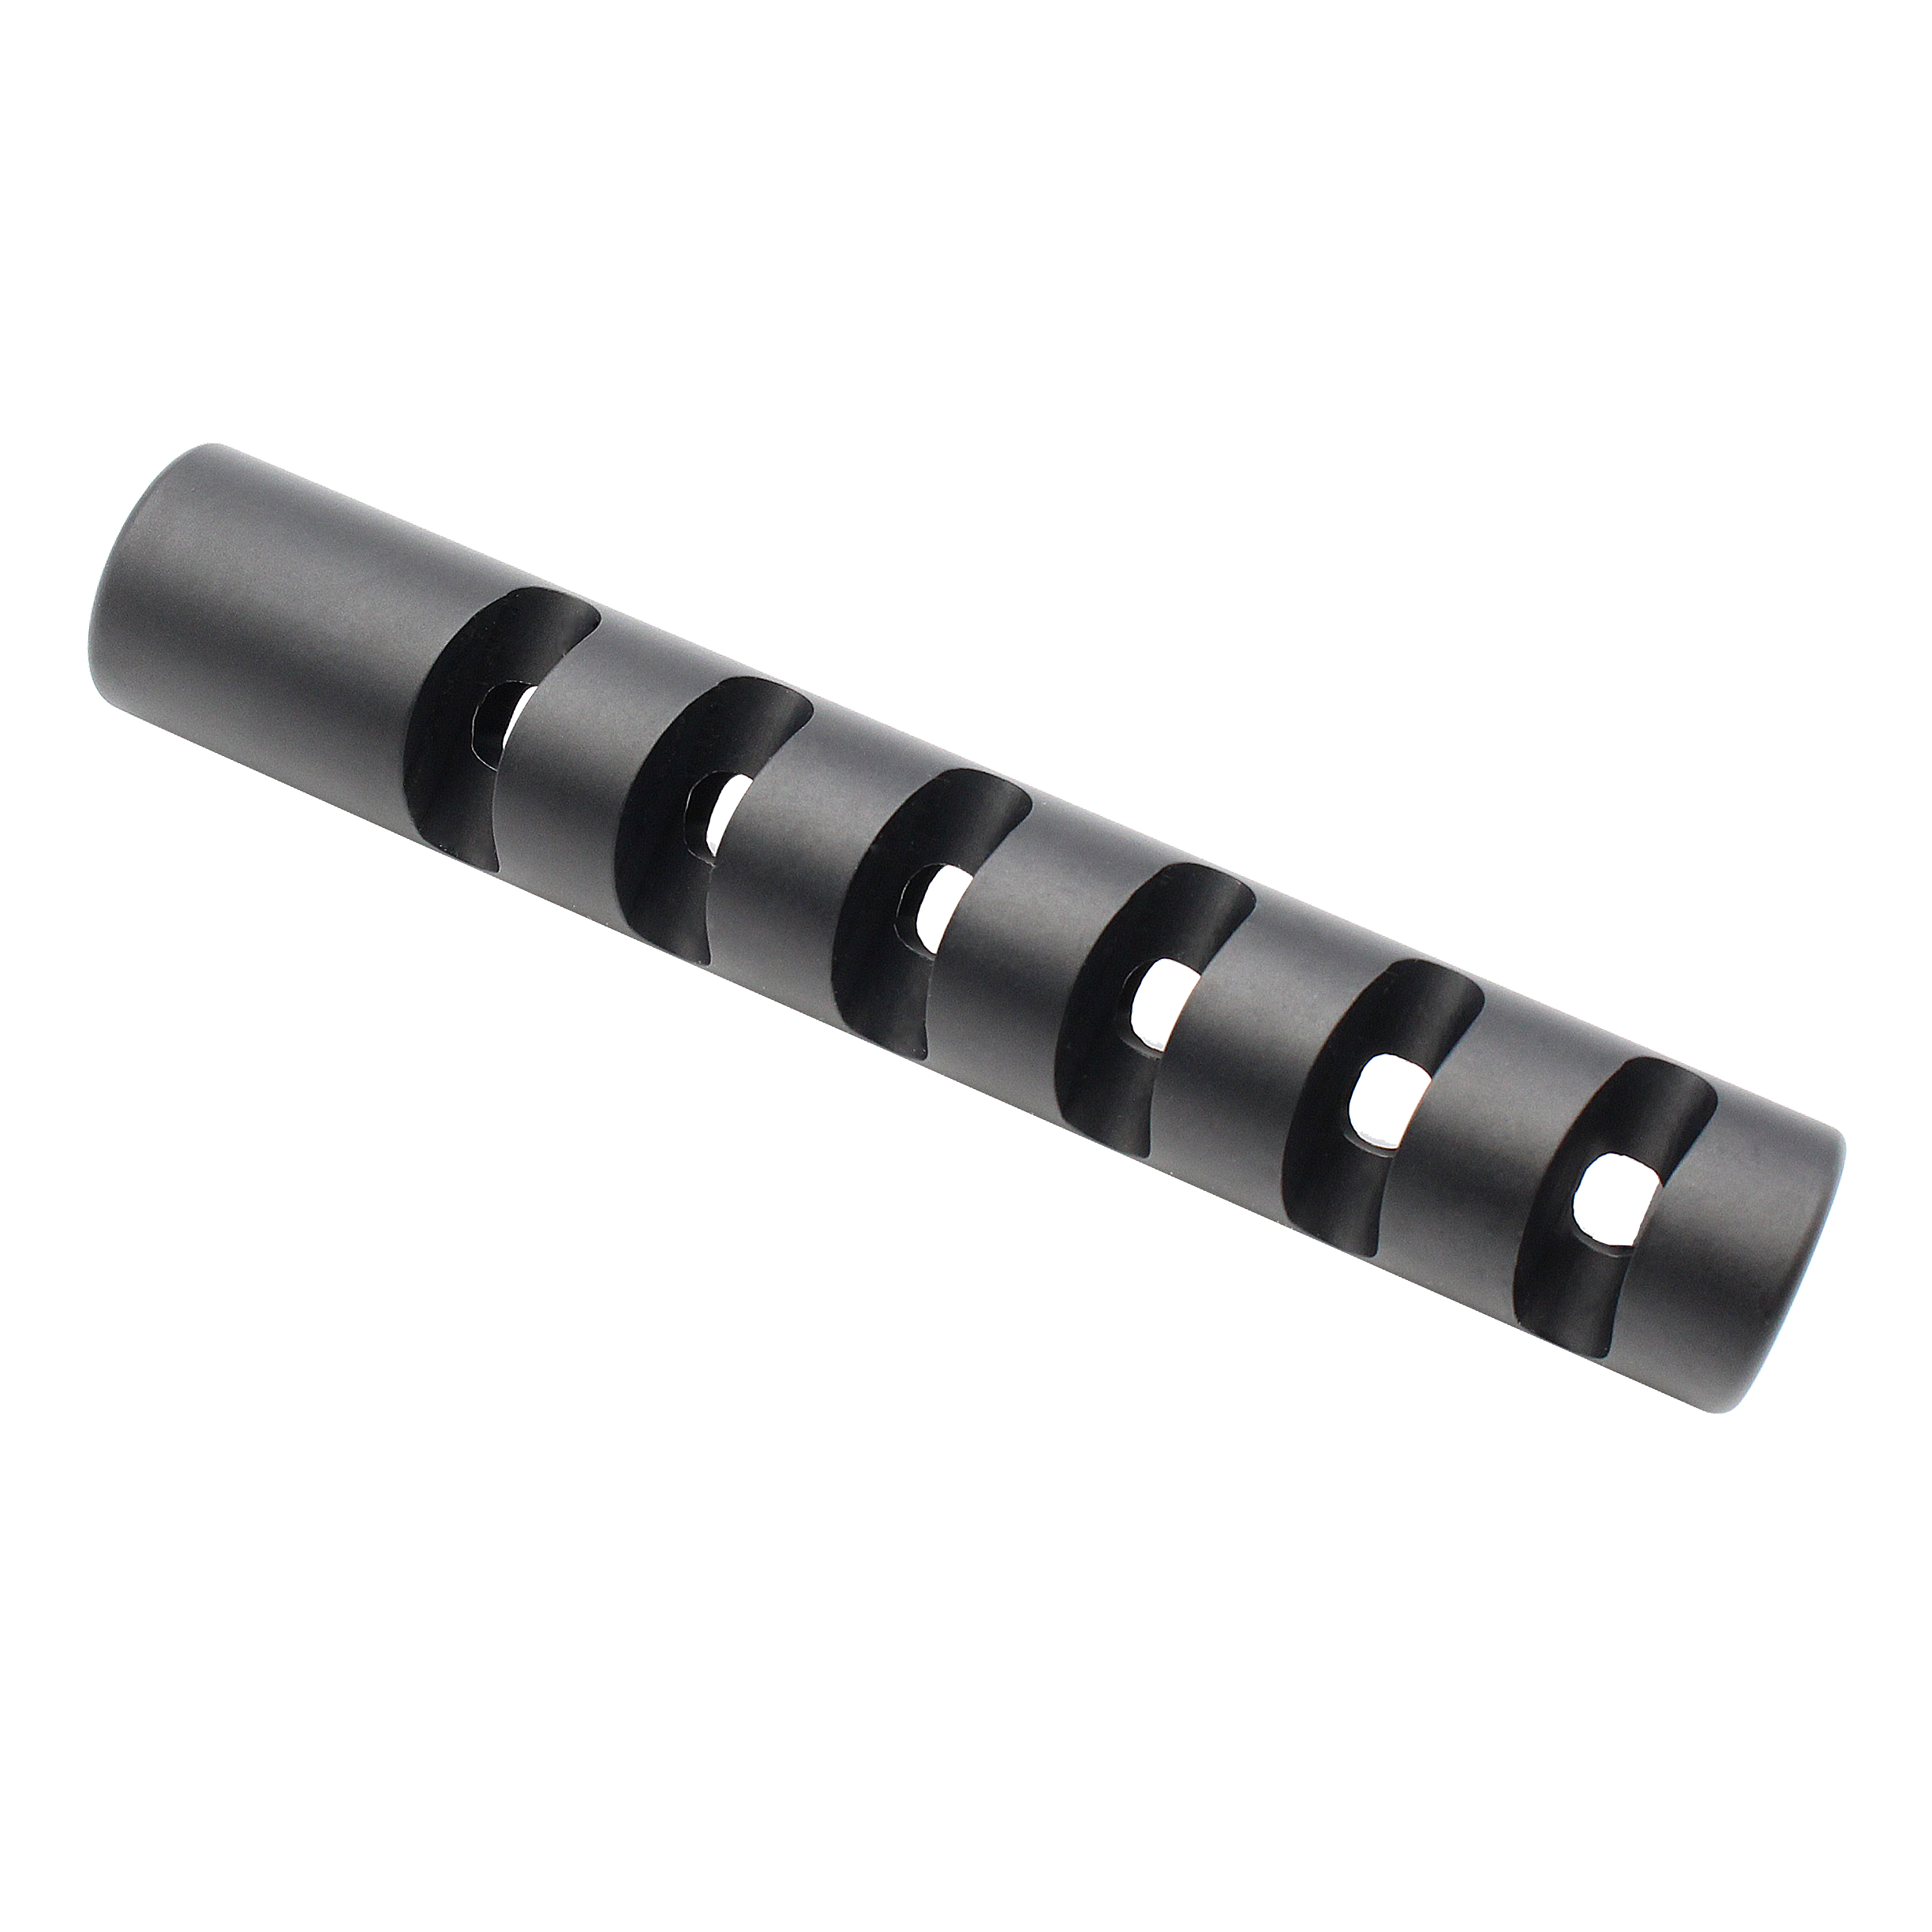 6 Gilled / Slotted Muzzle Brake for AK-47 - Black